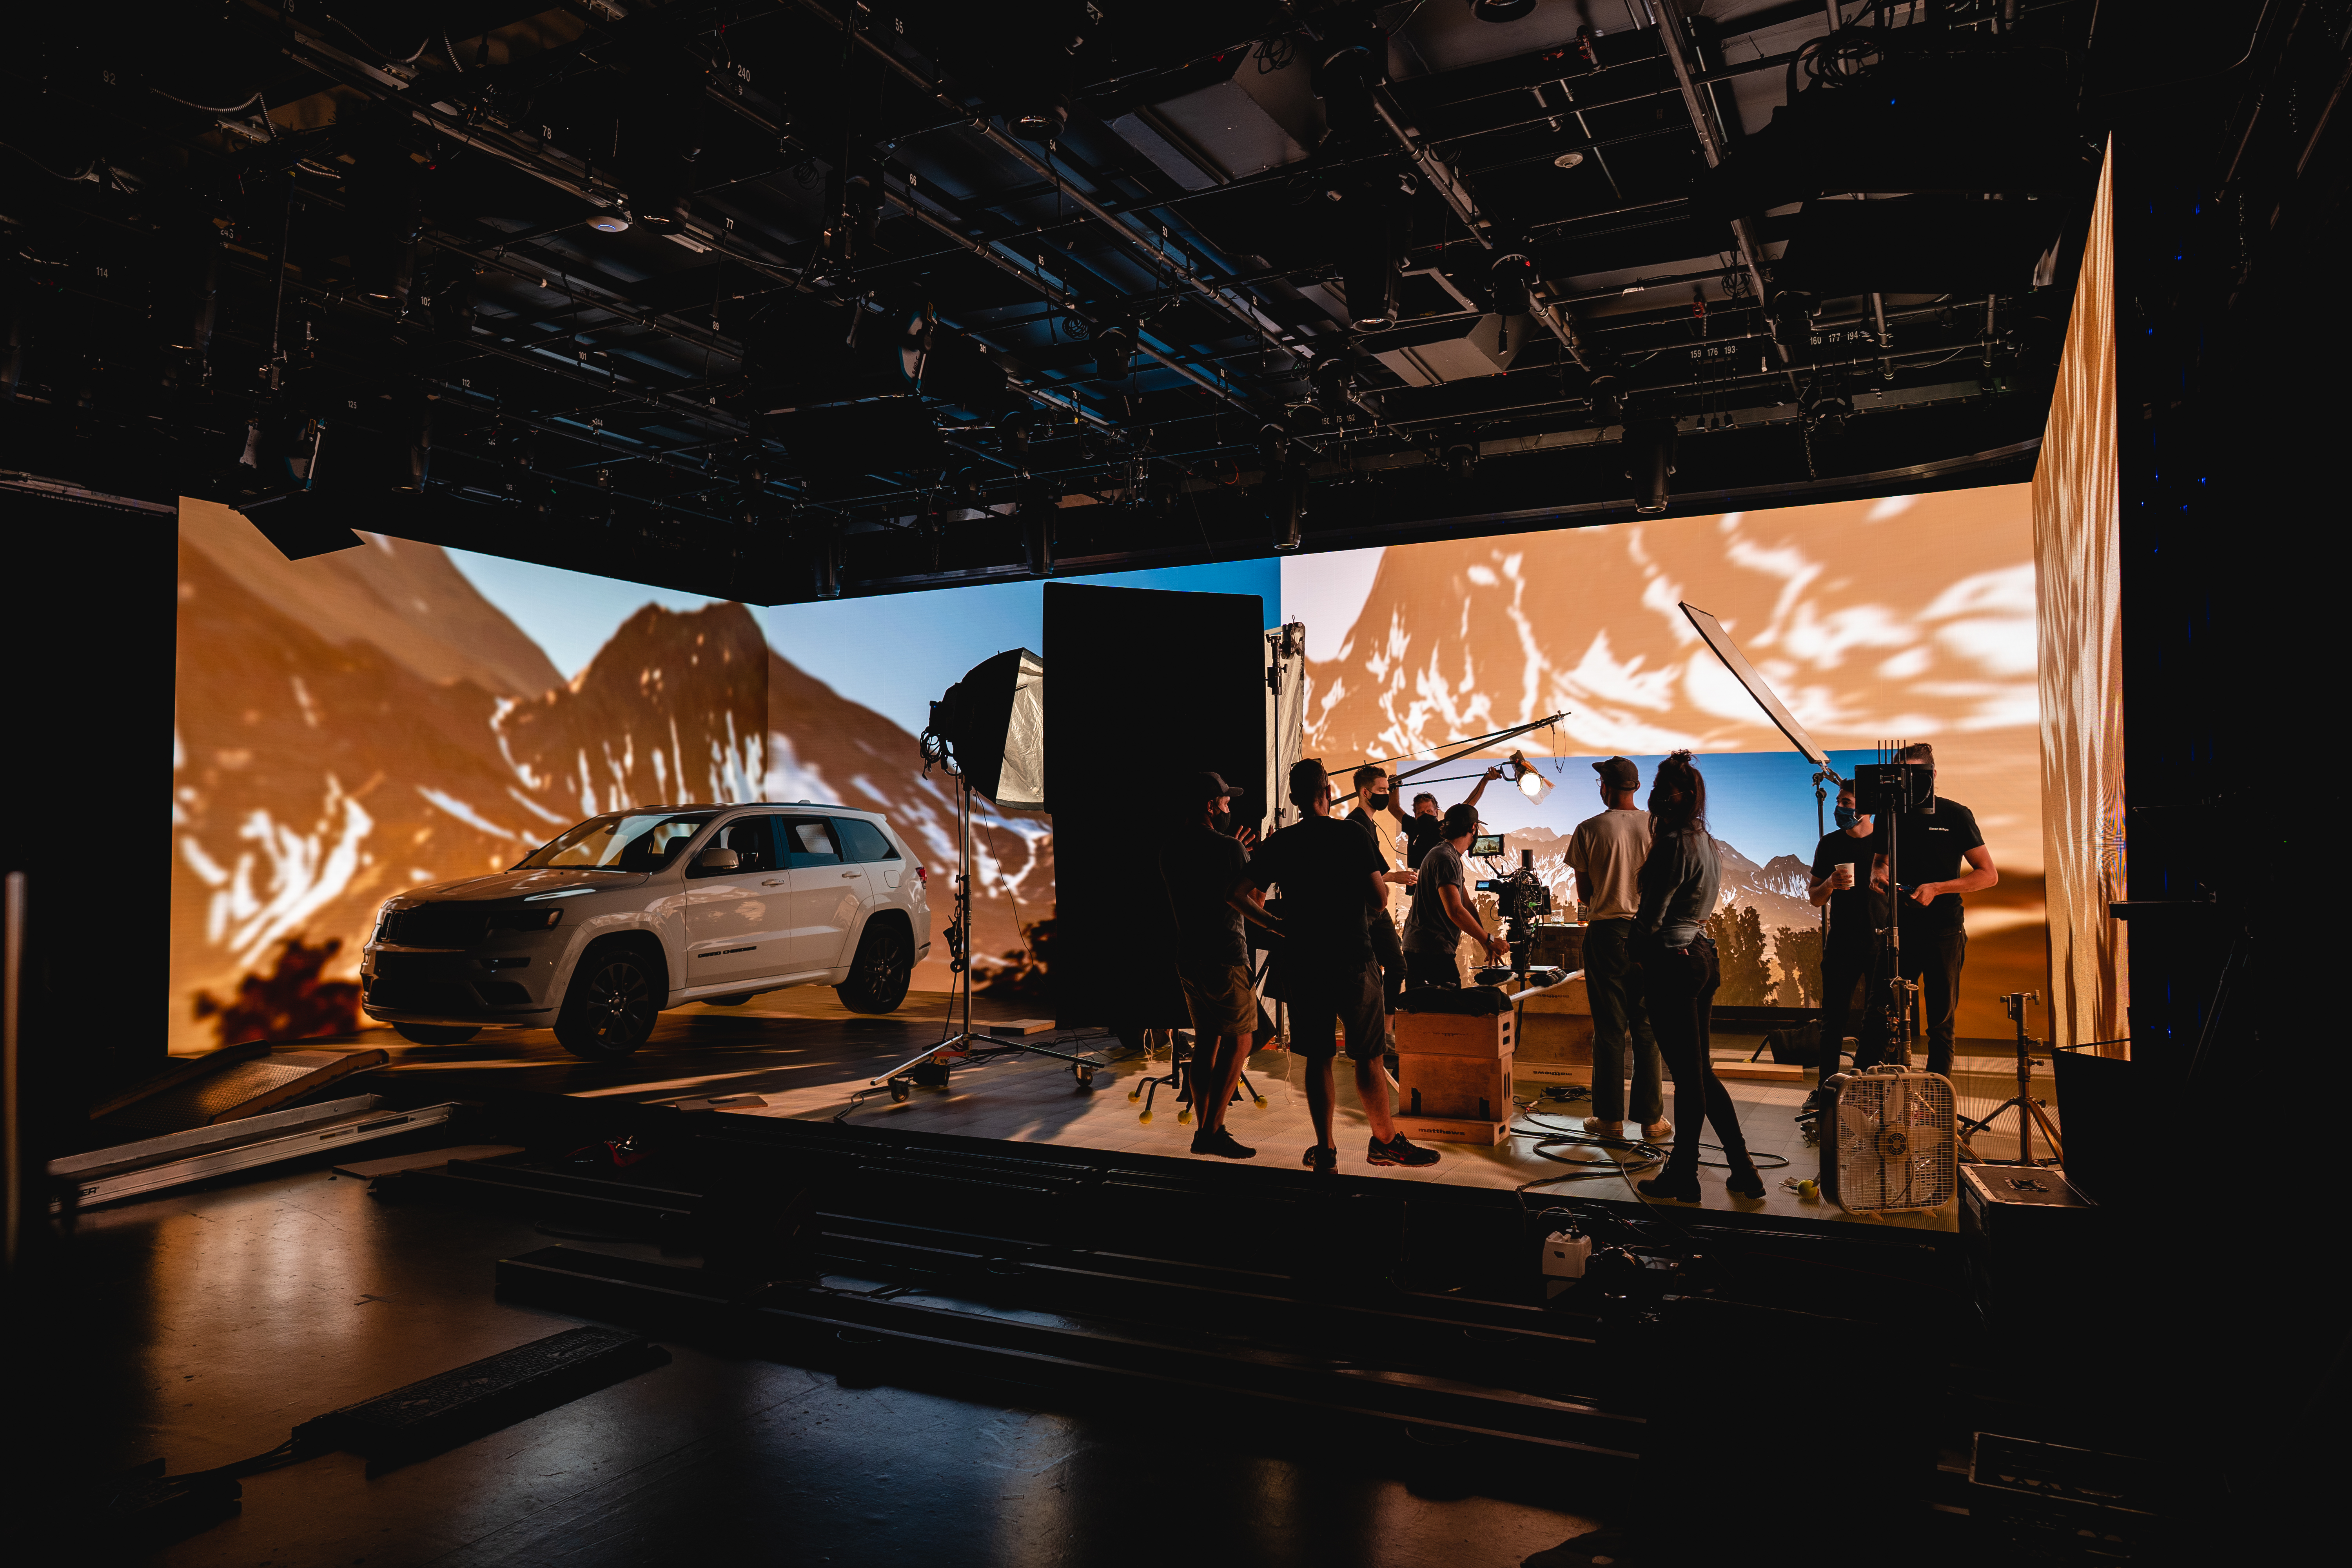 From interactive environments and live events to content creation and permanent installations, we love working with our clients to bring their vision to life in a unique way for their customers.